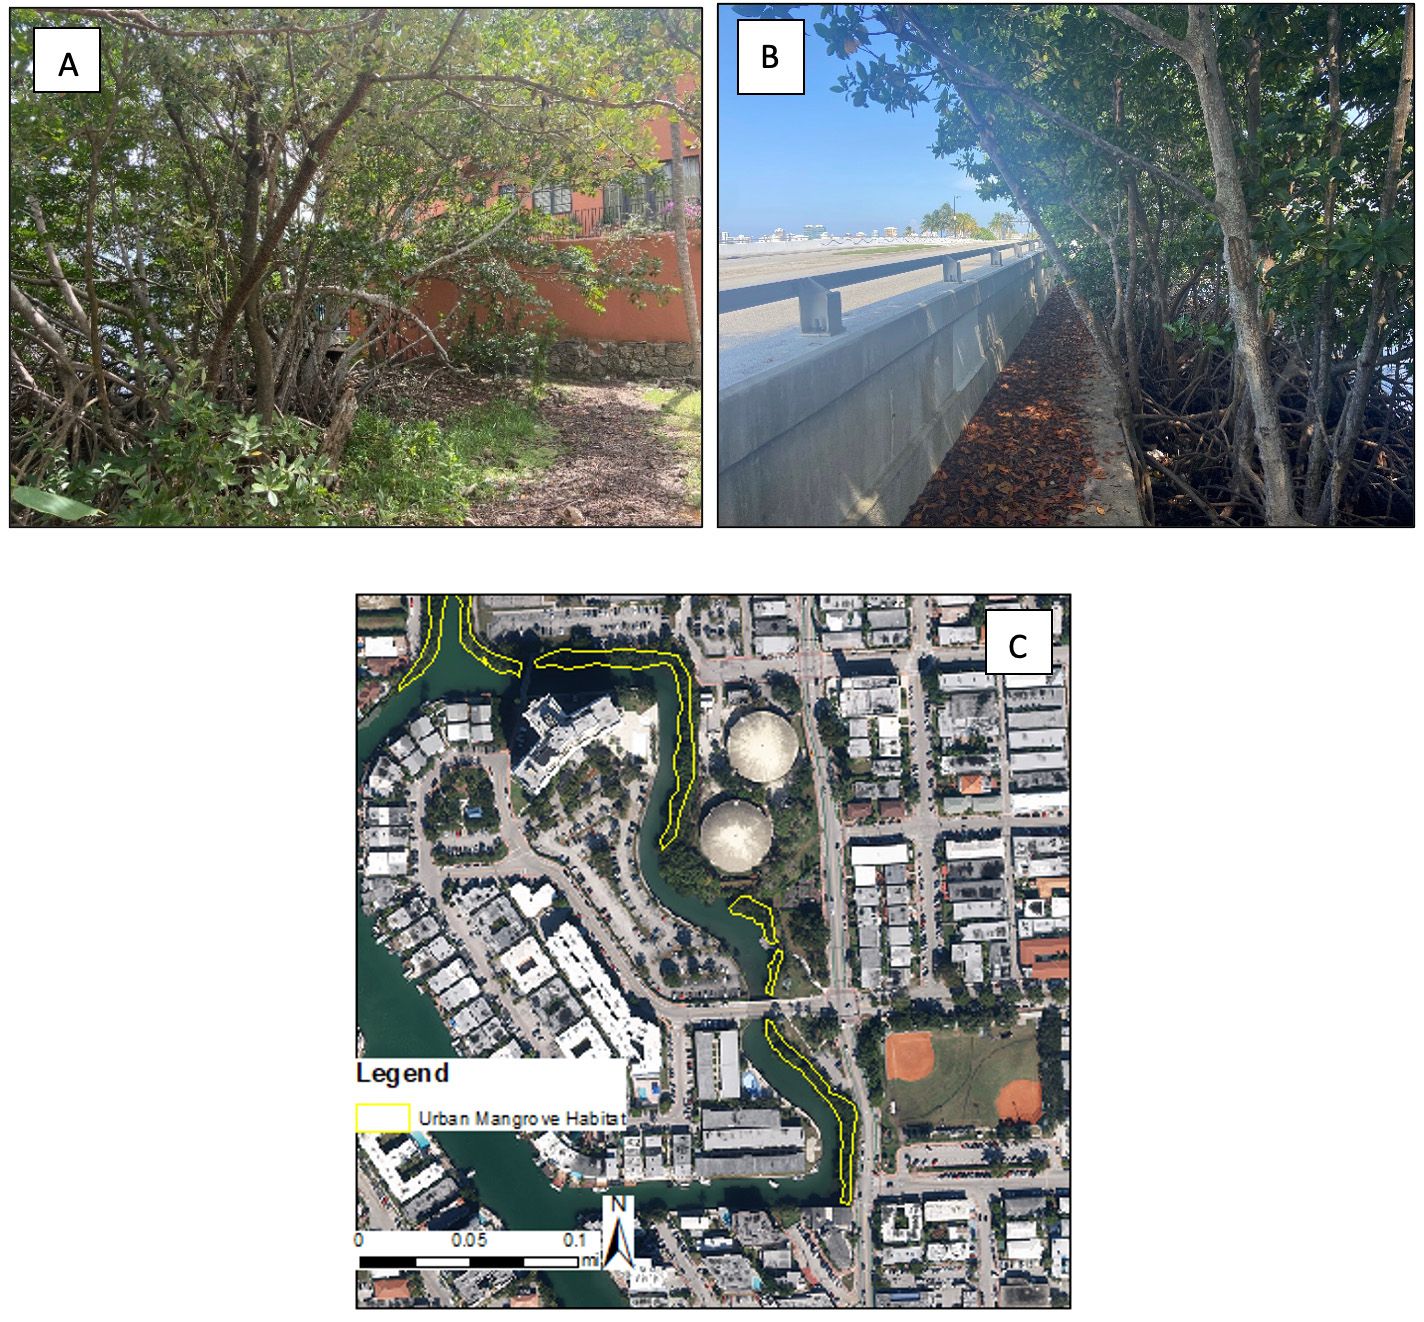 Images of urban mangroves in Miami-Dade County, FL: (A) mixed red, black, and white mangrove stand next to a housing complex, (B) red mangroves next to a major road, and (C) an aerial image of urban mangroves located near Normandy Isles in Miami Beach, FL. 